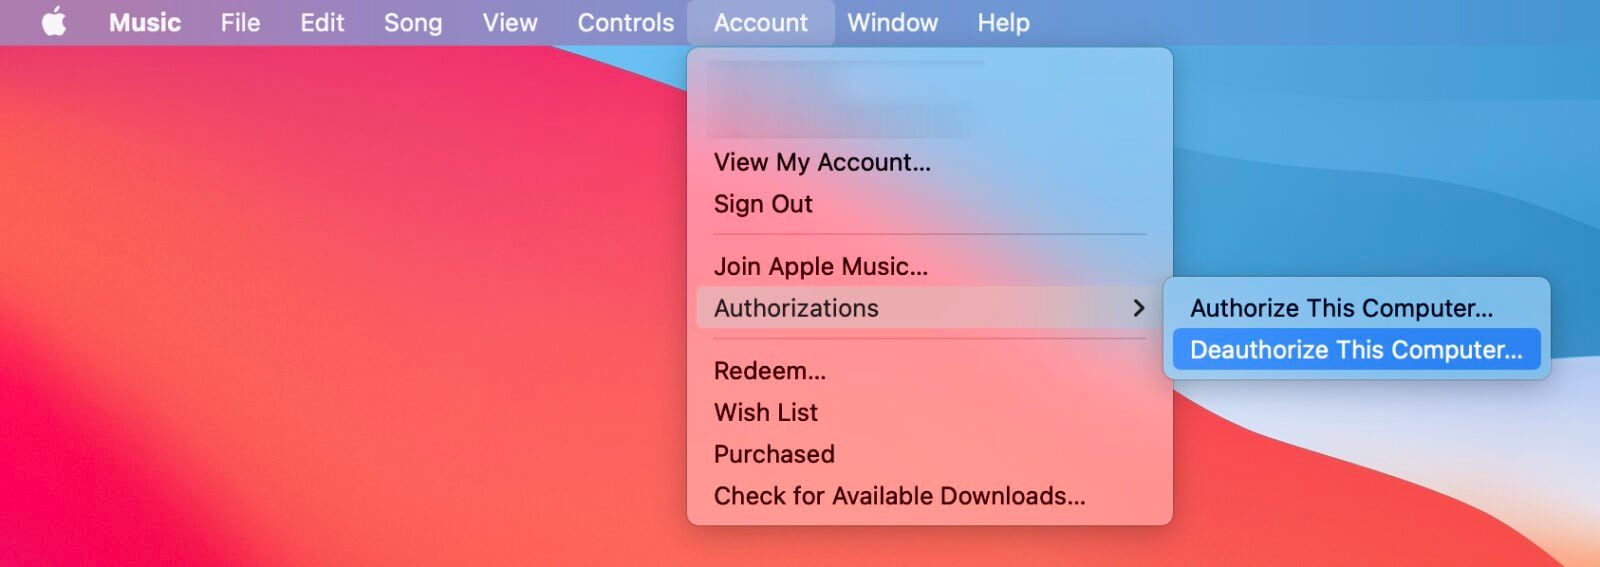 How to Deauthorize a Mac Computer on iTunes or Apple Music